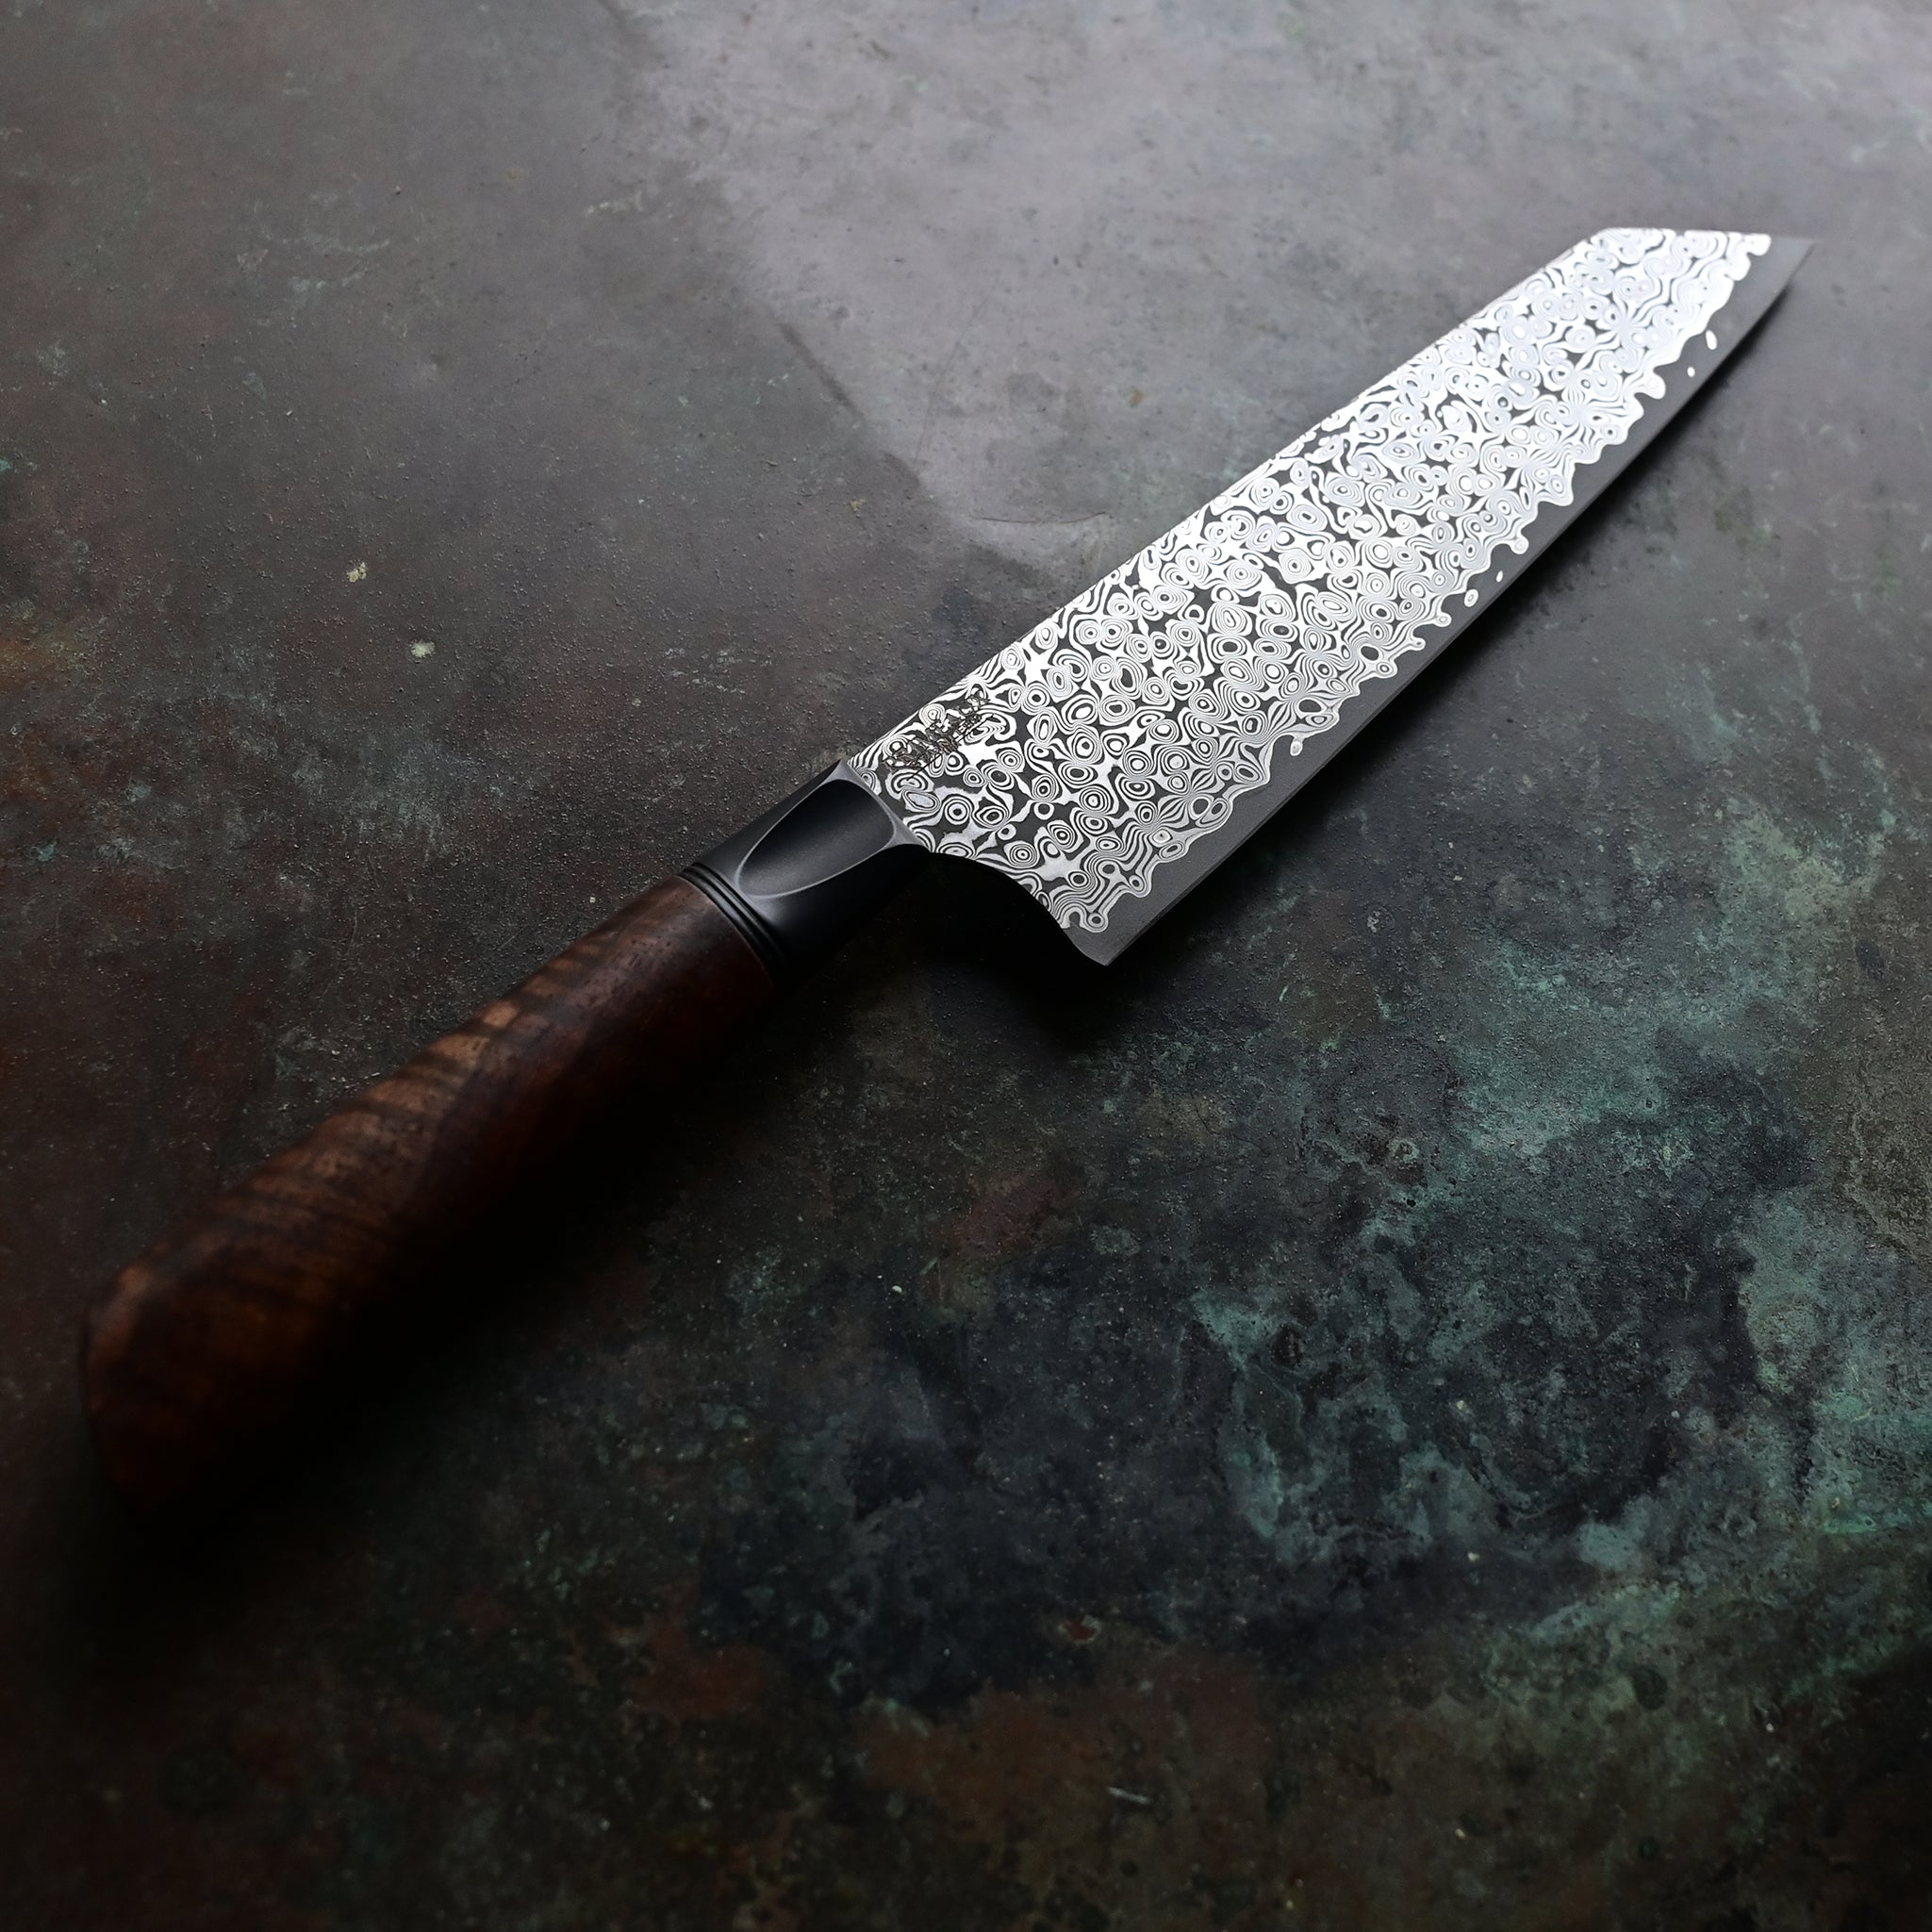 Elegantly redesigned Kiritsuke knife on a concrete surface, with a lighter, sharper blade, a warm brown Claro walnut handle, a sleek black anodized bolster, and a 7" Raindrop San Mai Damascus blade showcasing a mesmerizing pattern